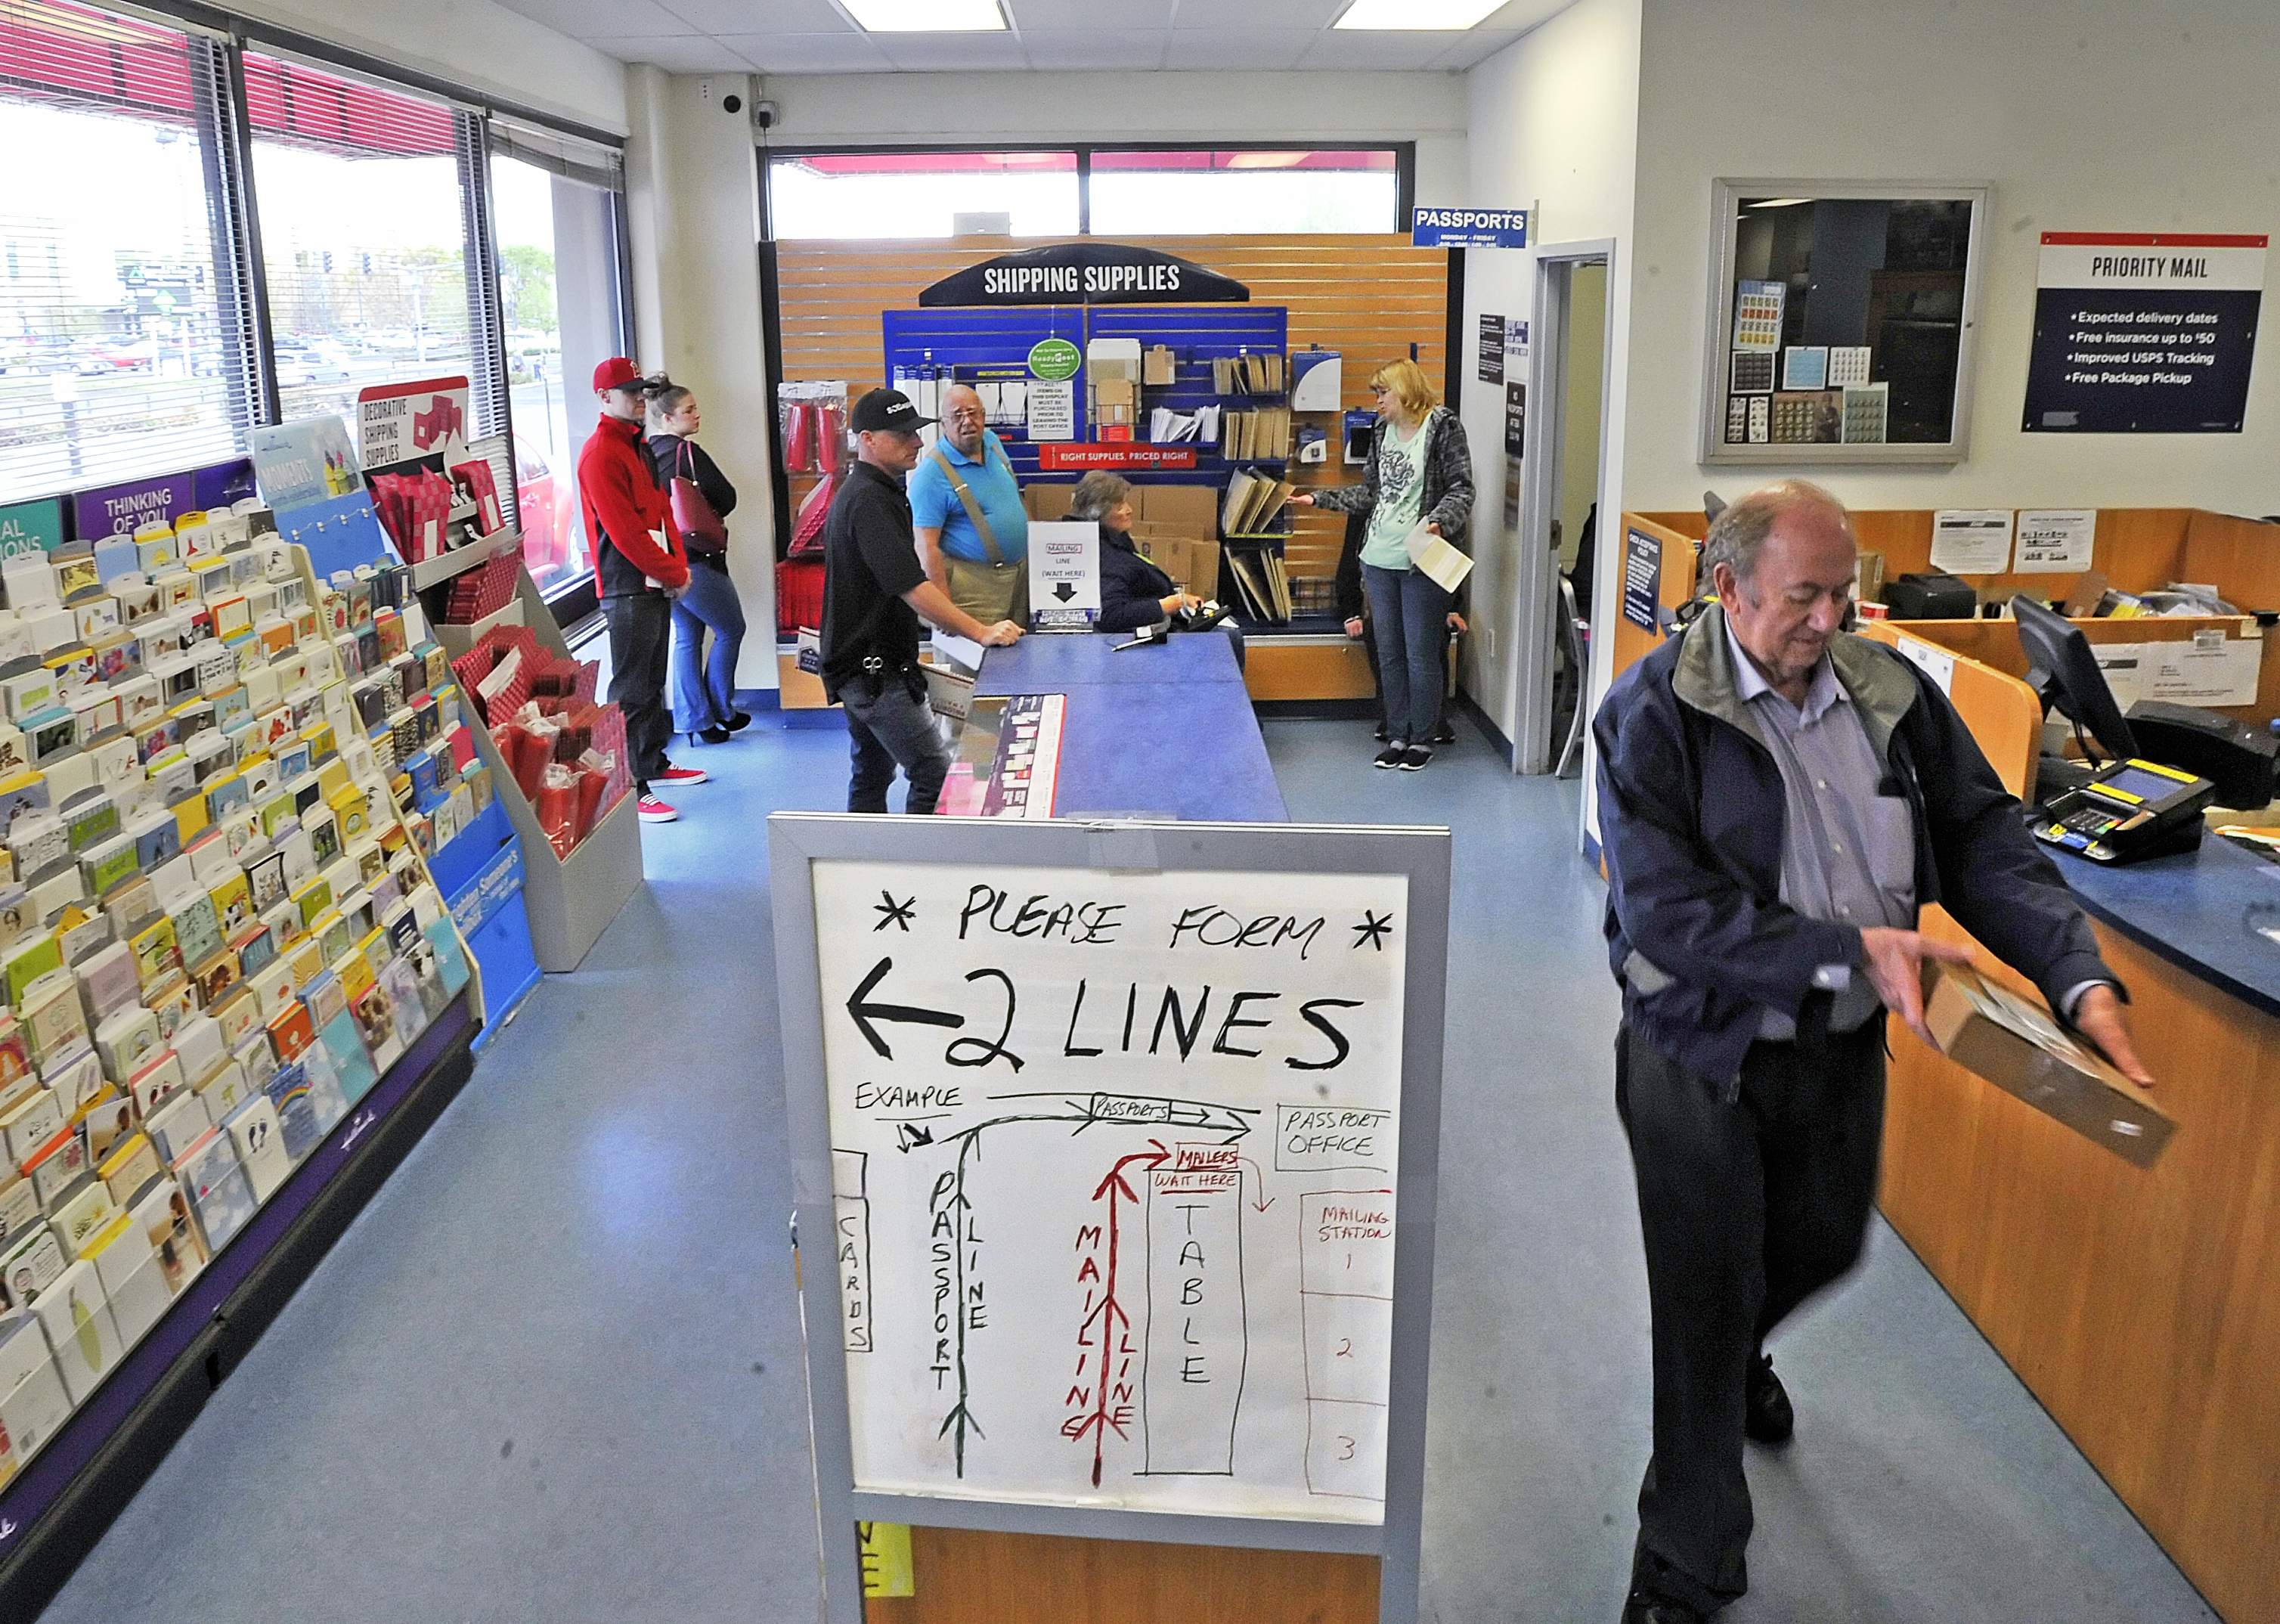 Medford residents complain about long passport lines at post office